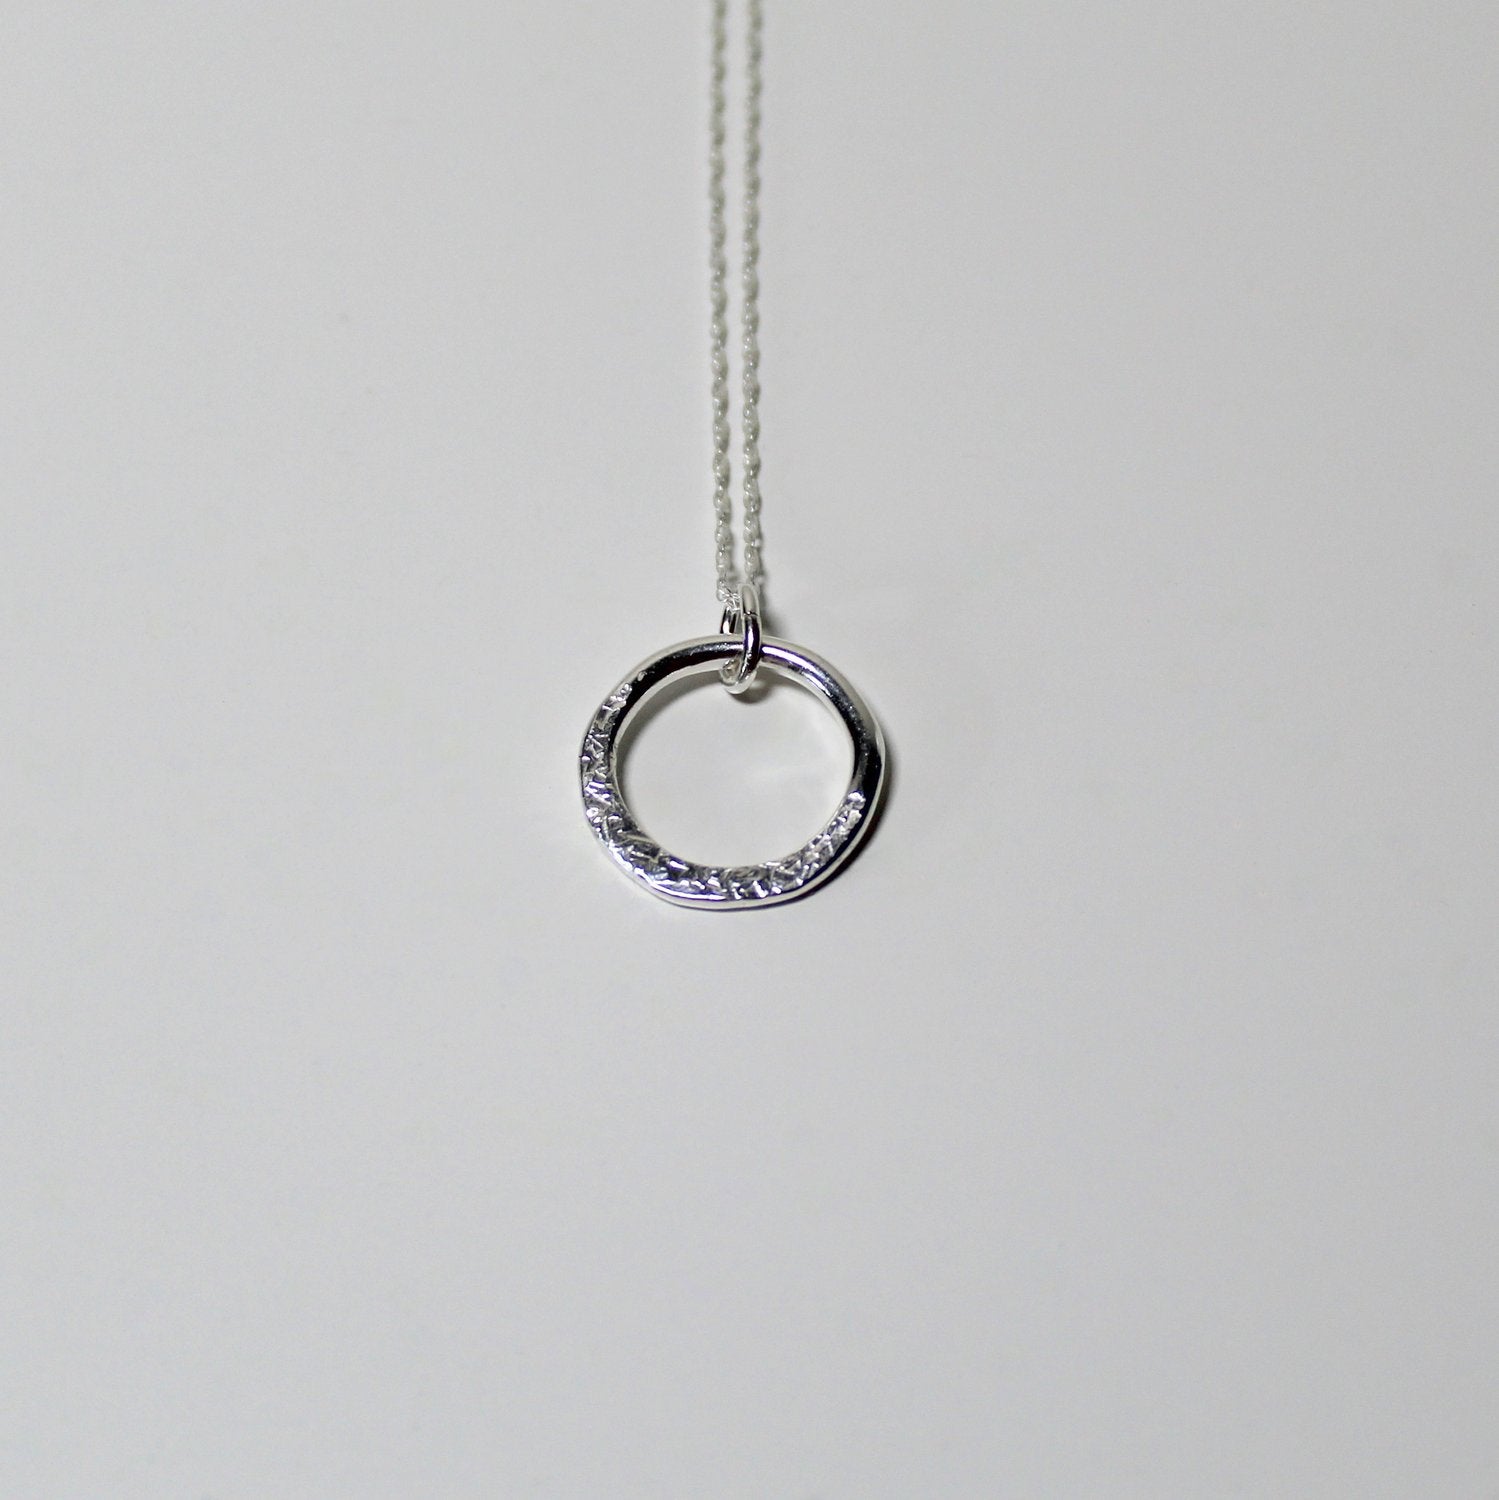 Dainty Sterling Silver Circle Eclipse Necklace - Shine On Shop